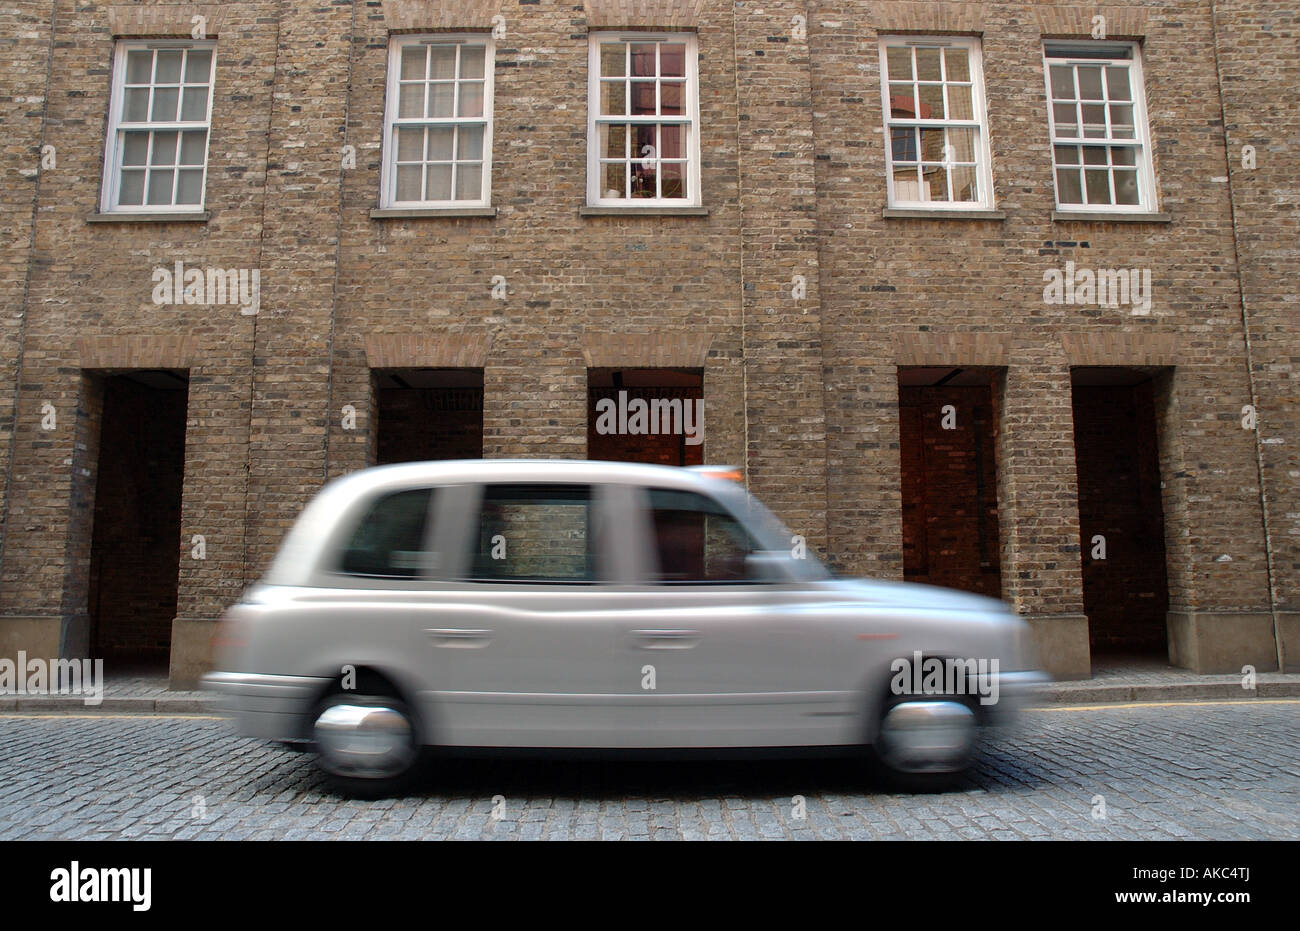 A London icon, a licenced silver taxi rushing through the cobbled streets of Wapping Stock Photo